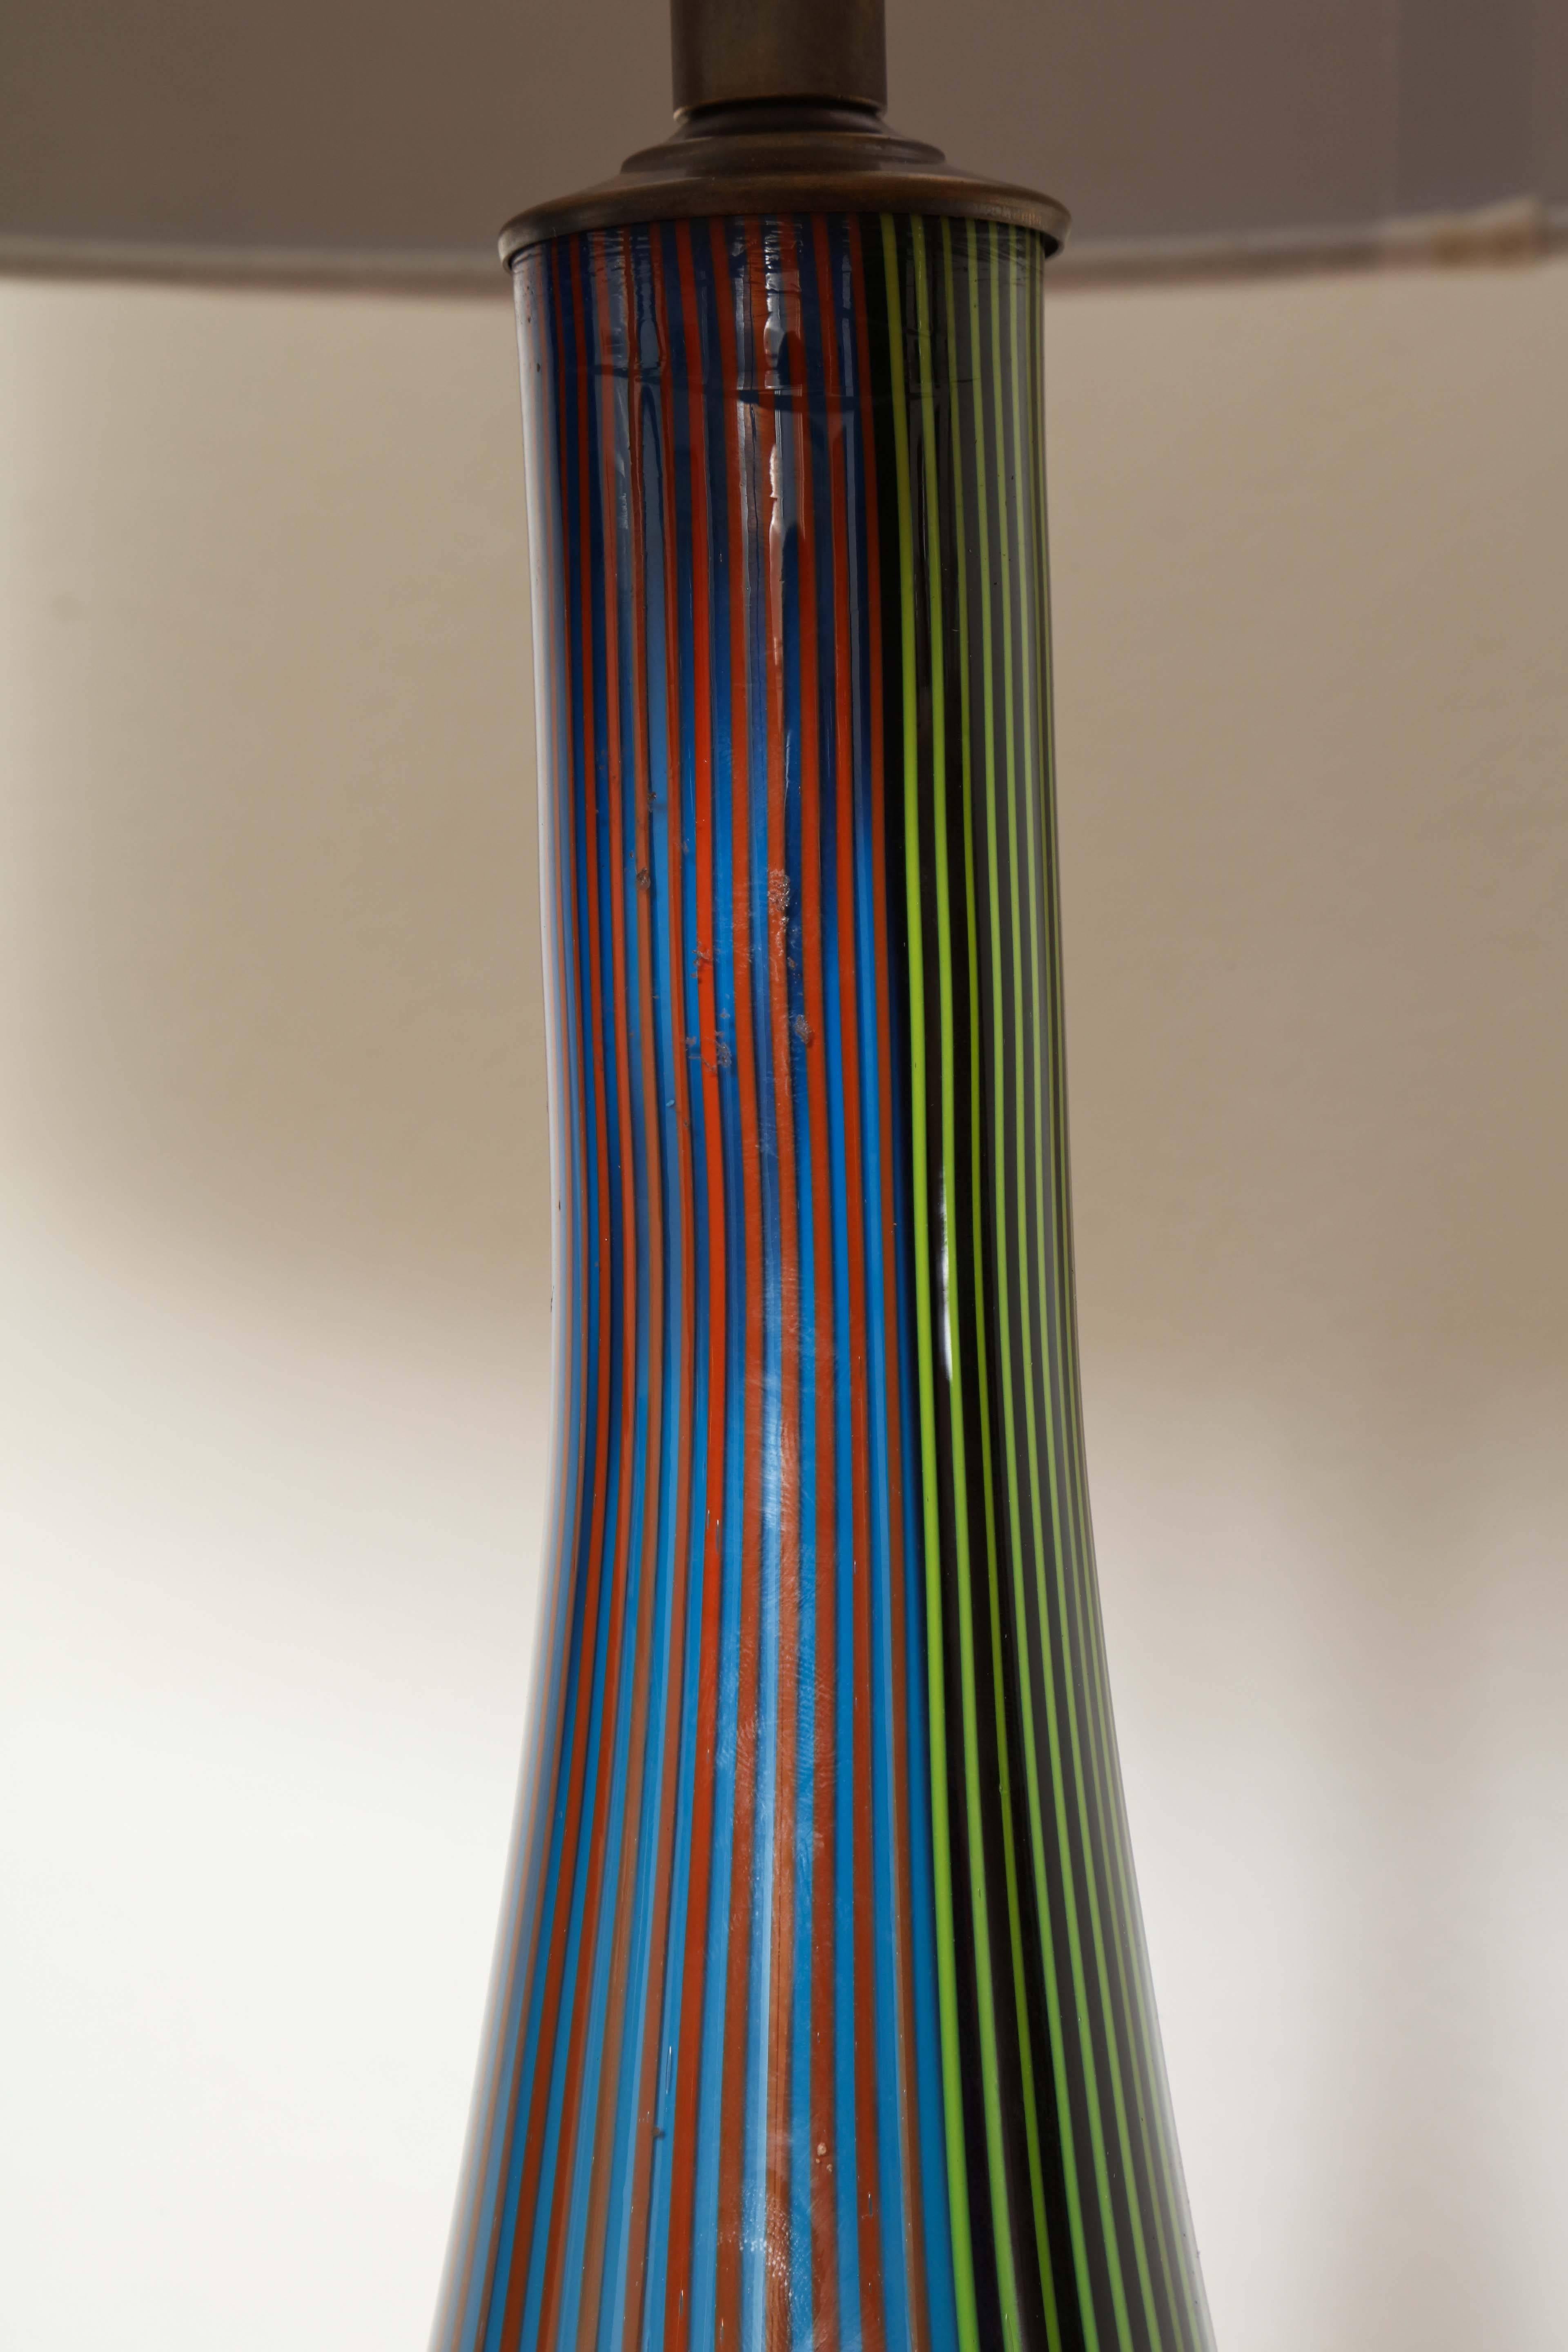 Mid-20th Century Pair of Striped Murano Glass Lamps For Sale